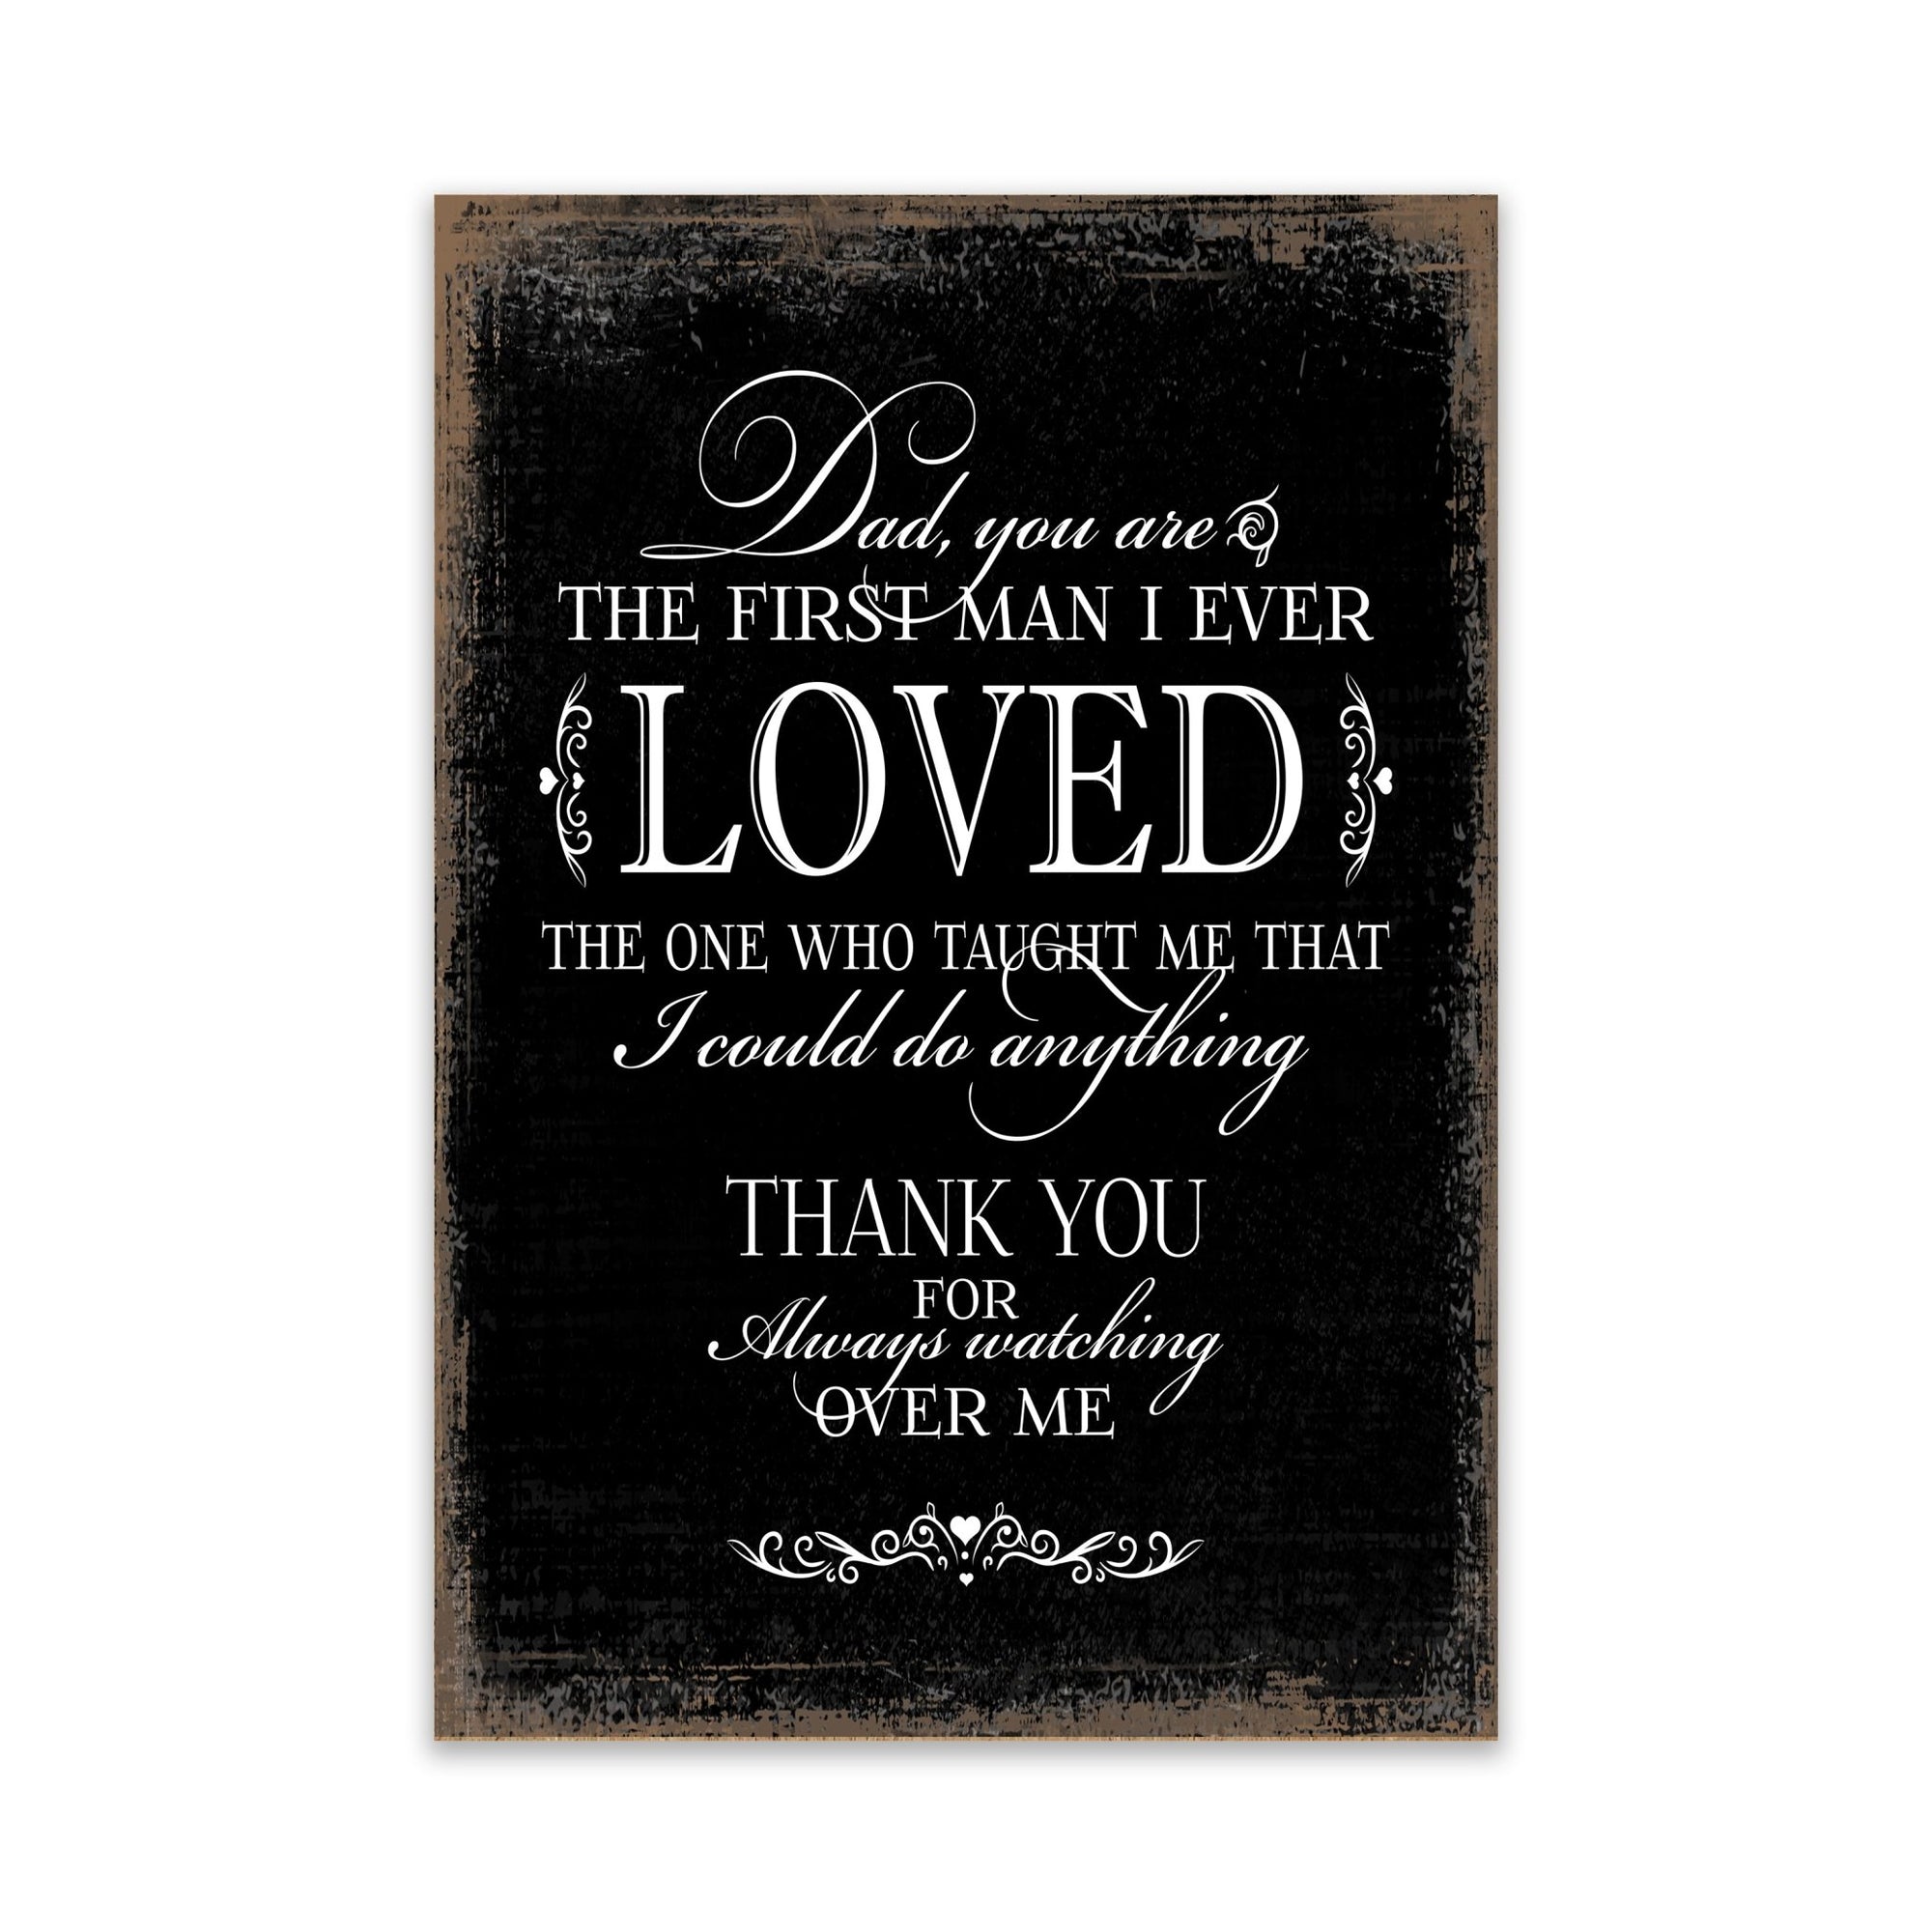 Modern Inspirational Memorial 5.5x 8 inches Wooden Sign Dad You are - Plaque Tabletop Decoration Loss of Loved One Bereavement Sympathy Keepsake - LifeSong Milestones